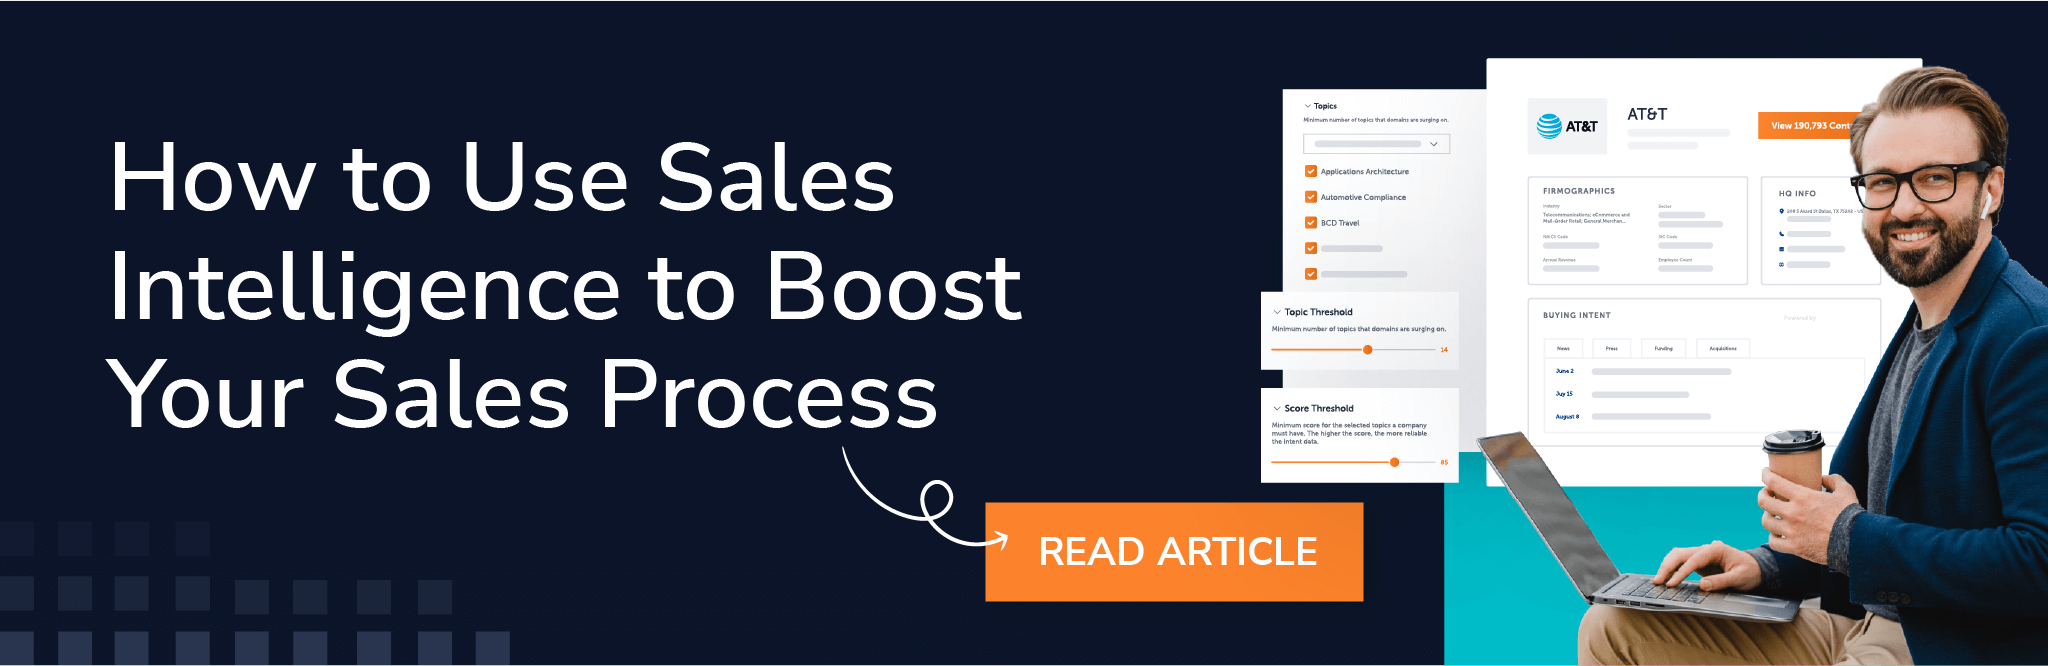 how to use sales intelligence to boost your sales process